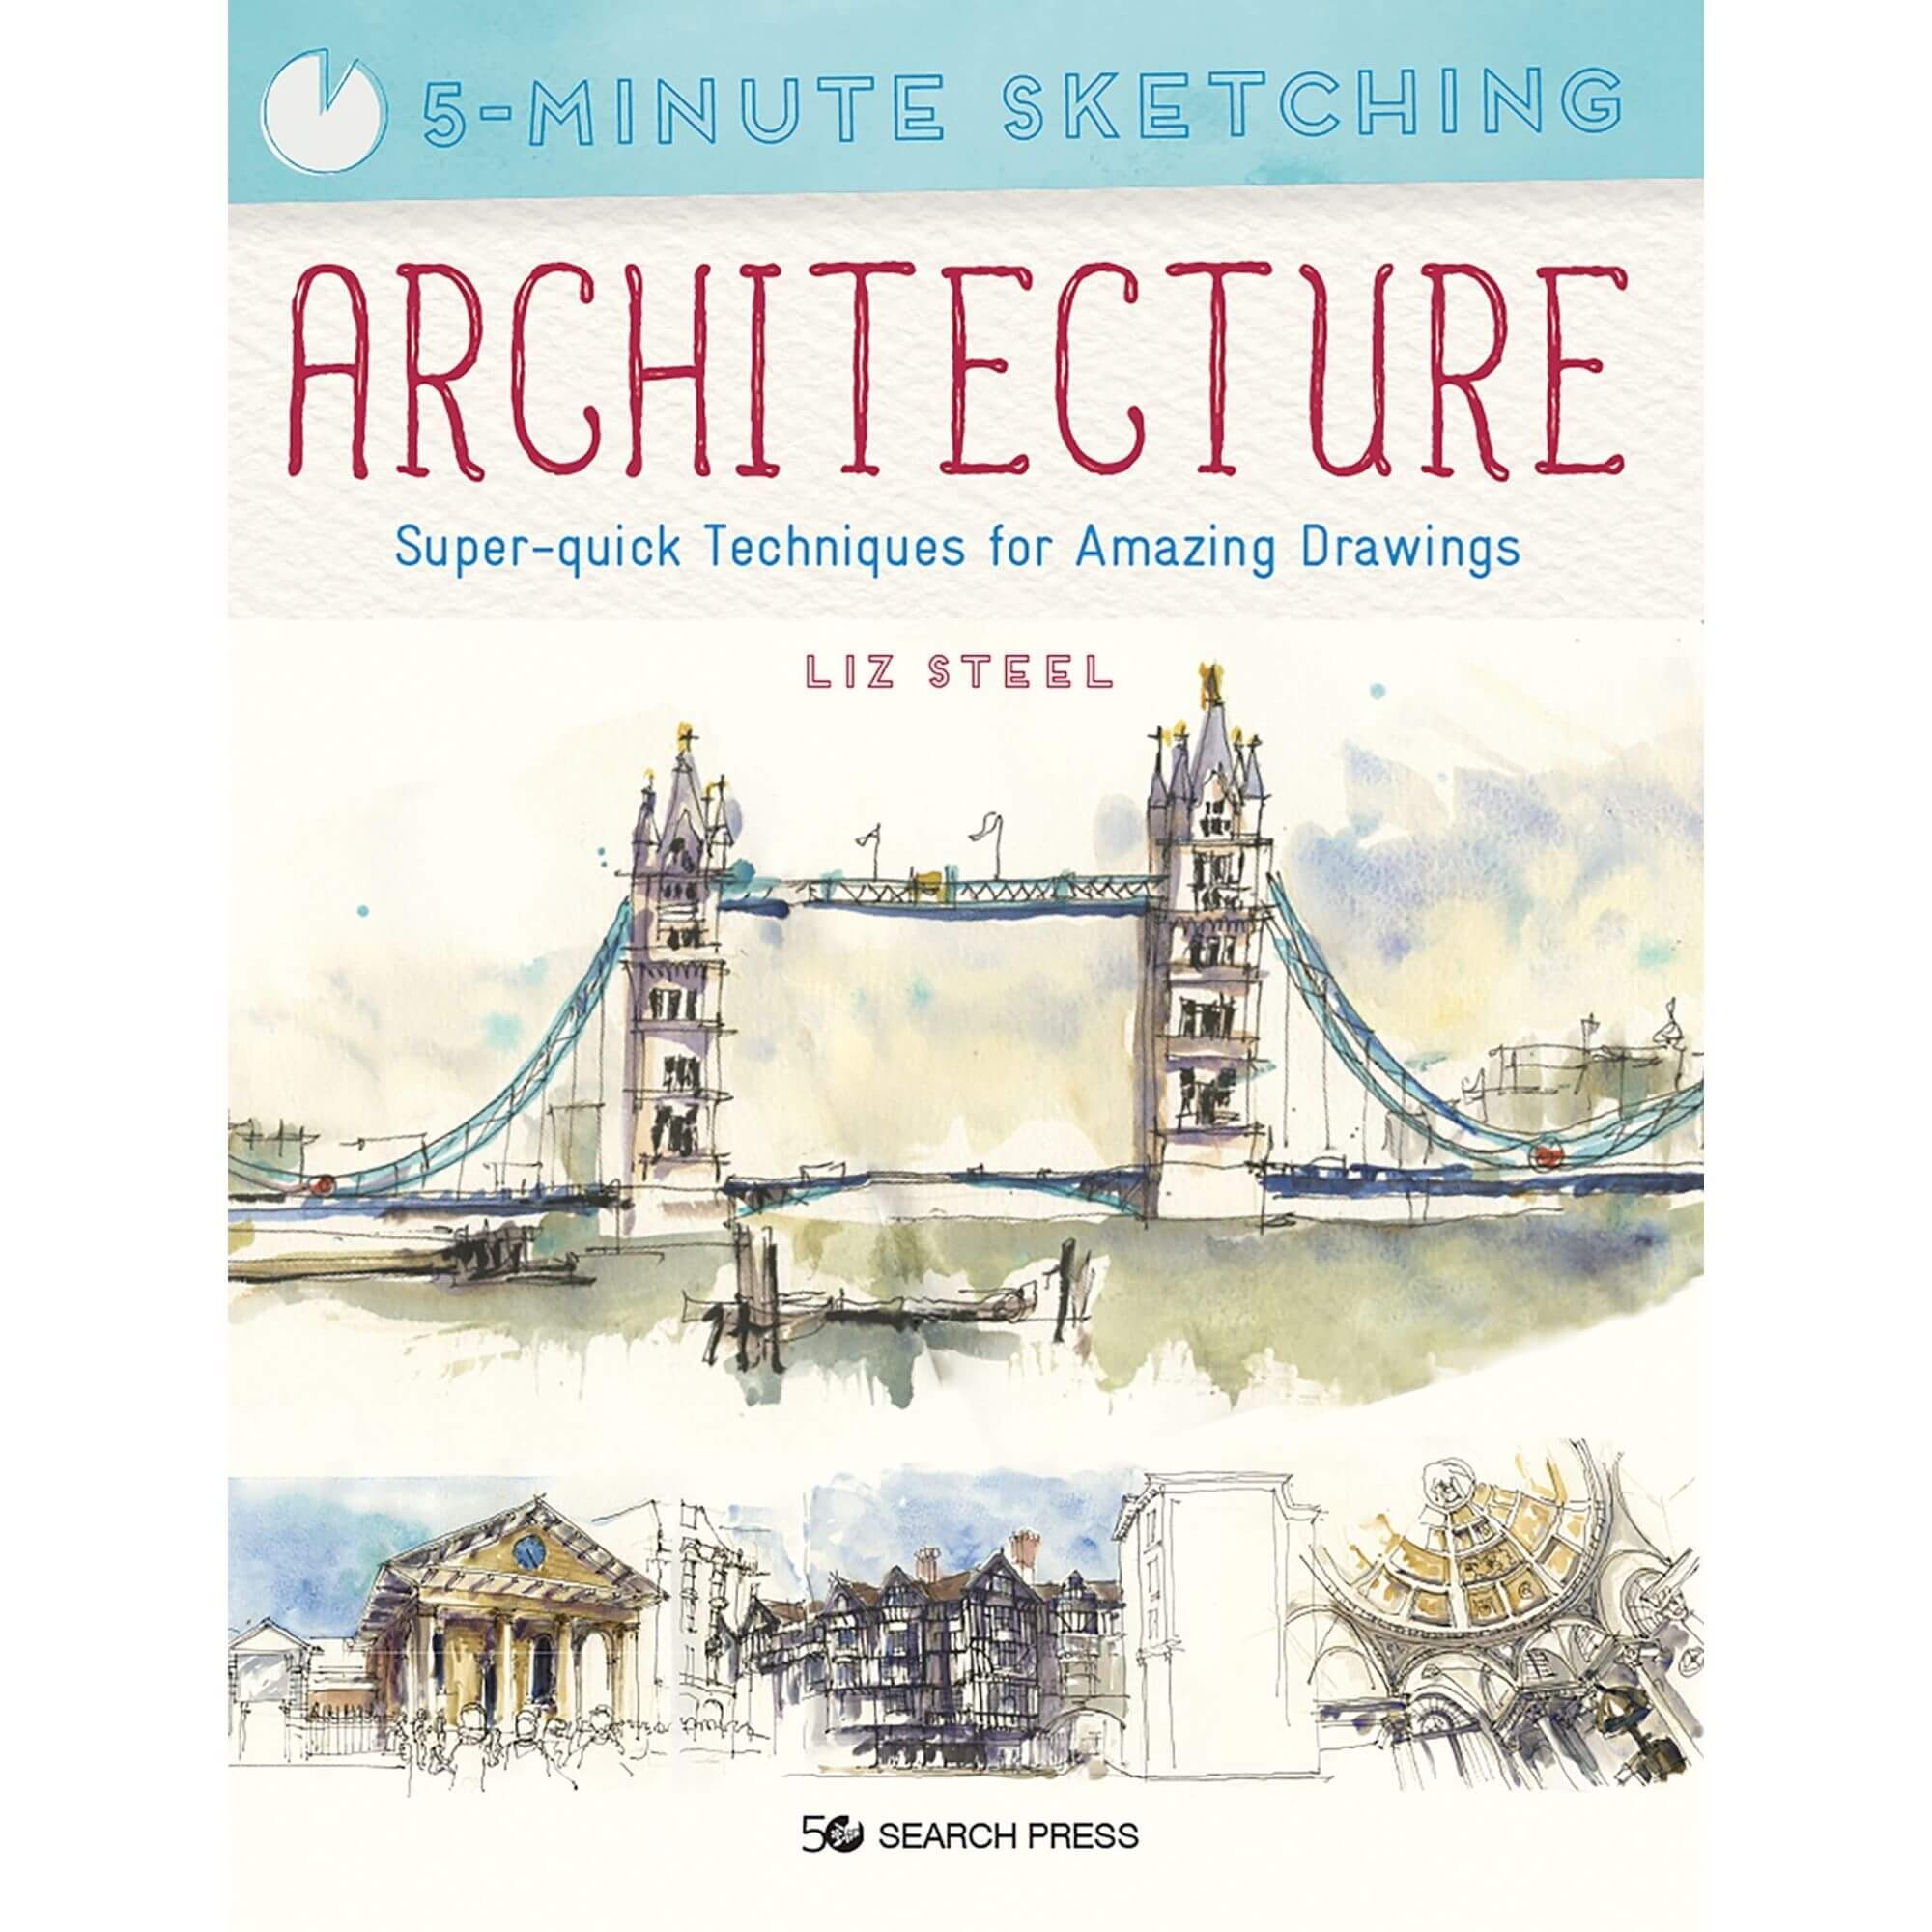 5-Minute Sketching: Architecture Book Cover